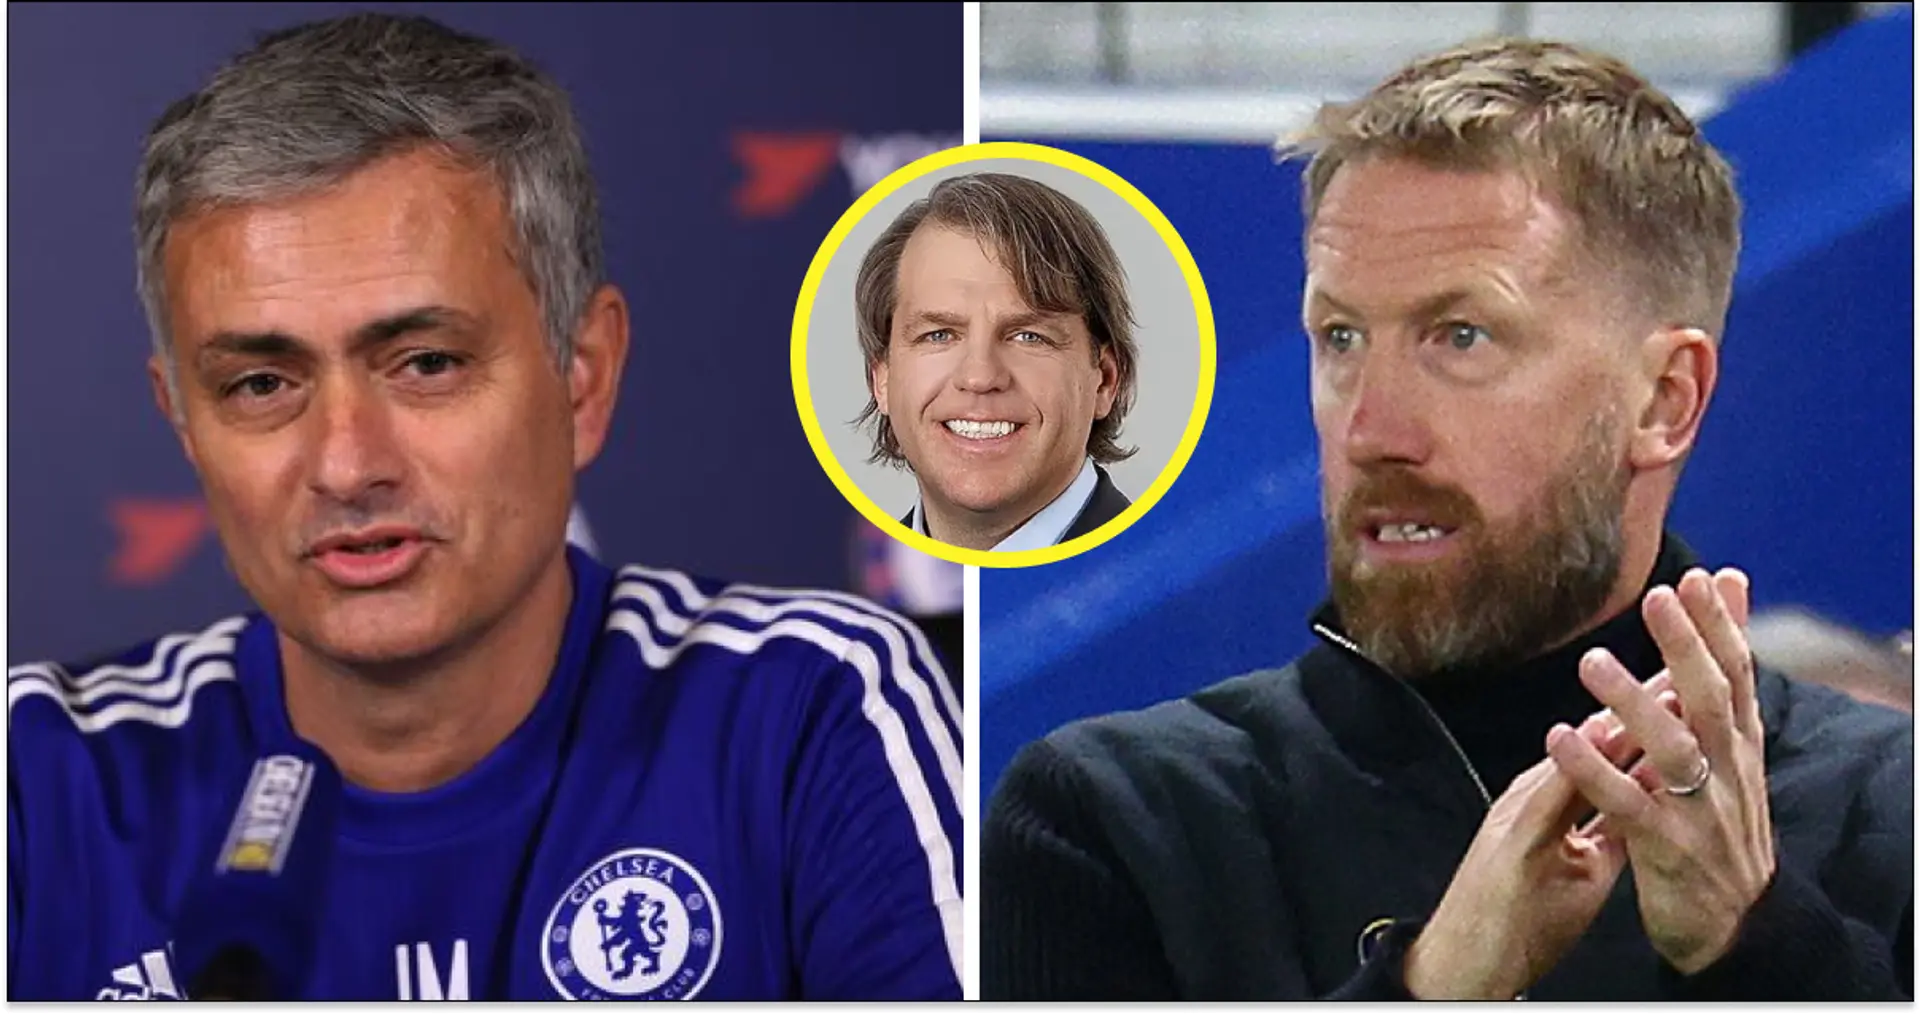 'Sorry, we are in another era' vs 'Send Potter on loan': Chelsea fans divided over Mourinho return